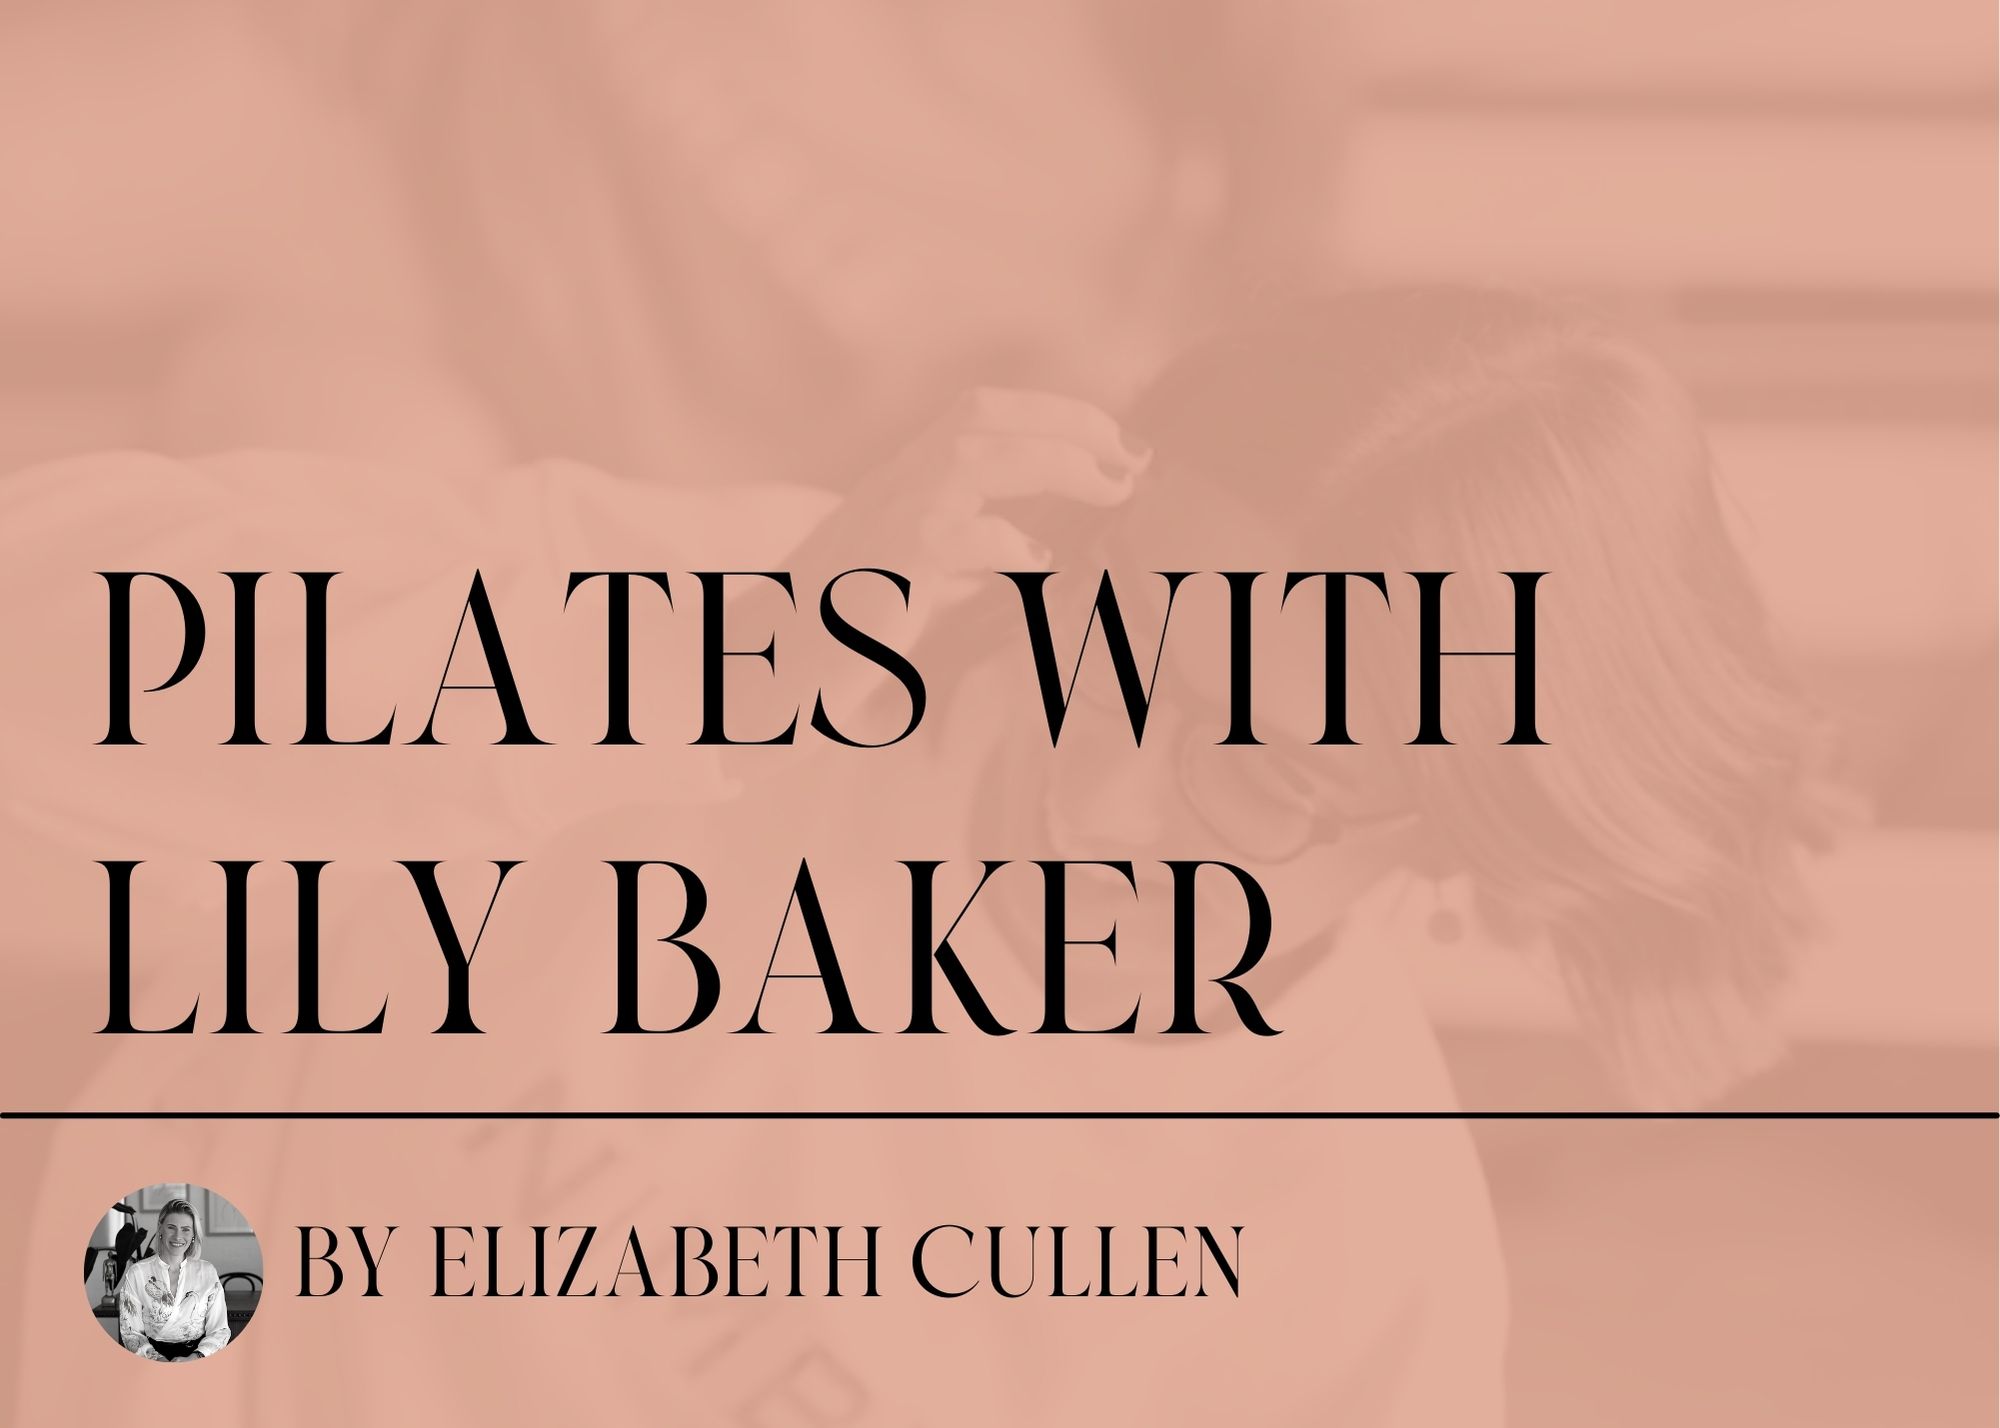 Pilates with Lily Baker